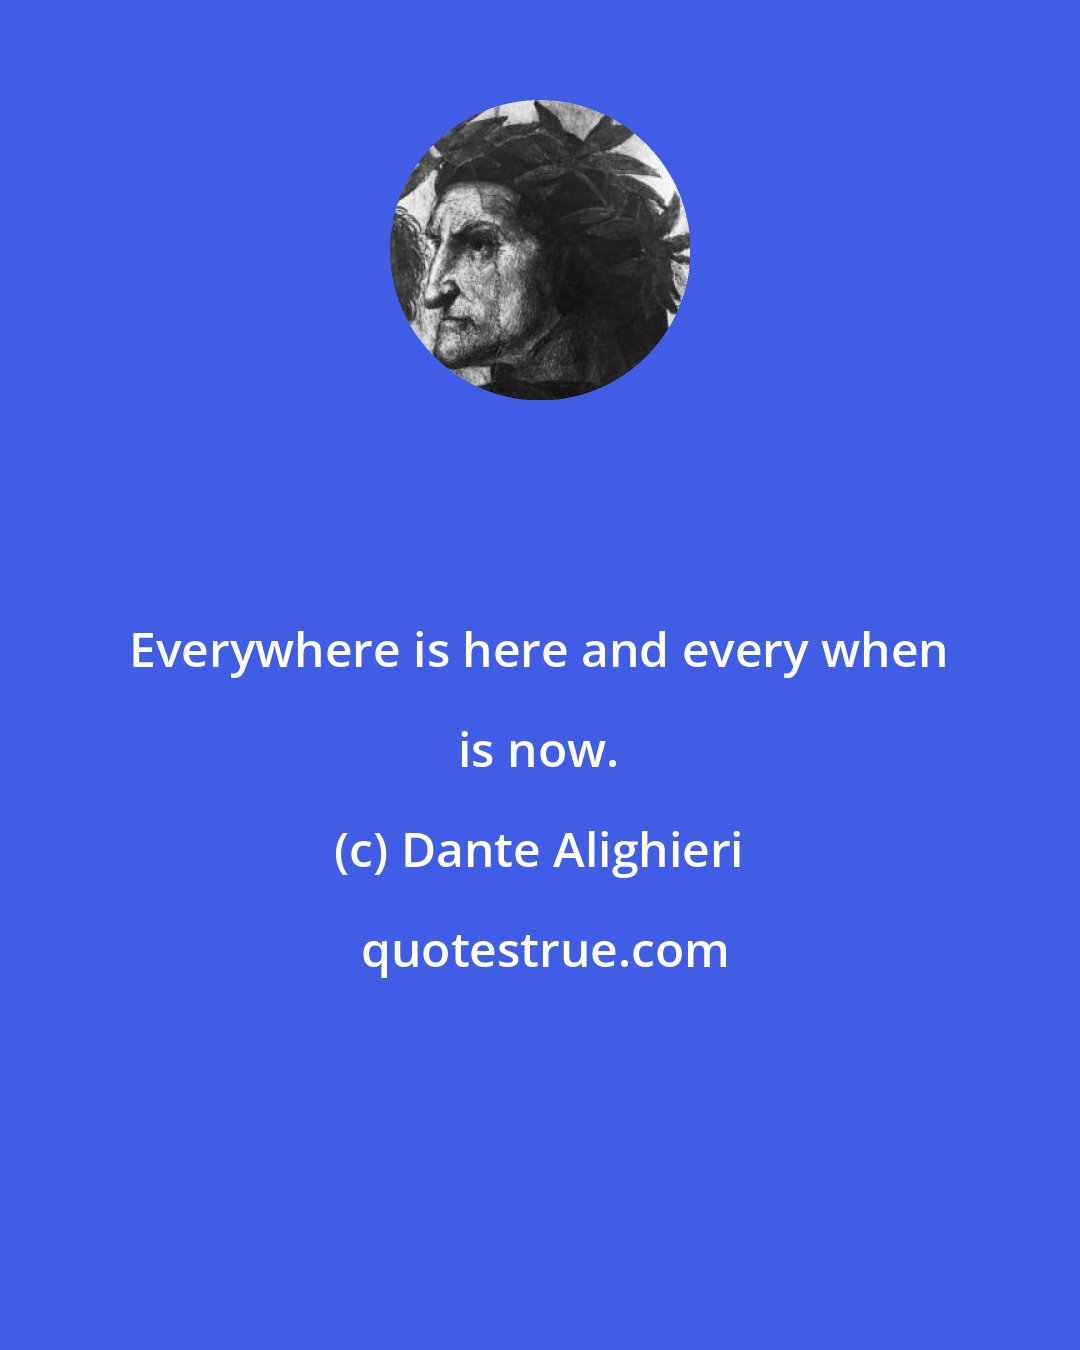 Dante Alighieri: Everywhere is here and every when is now.